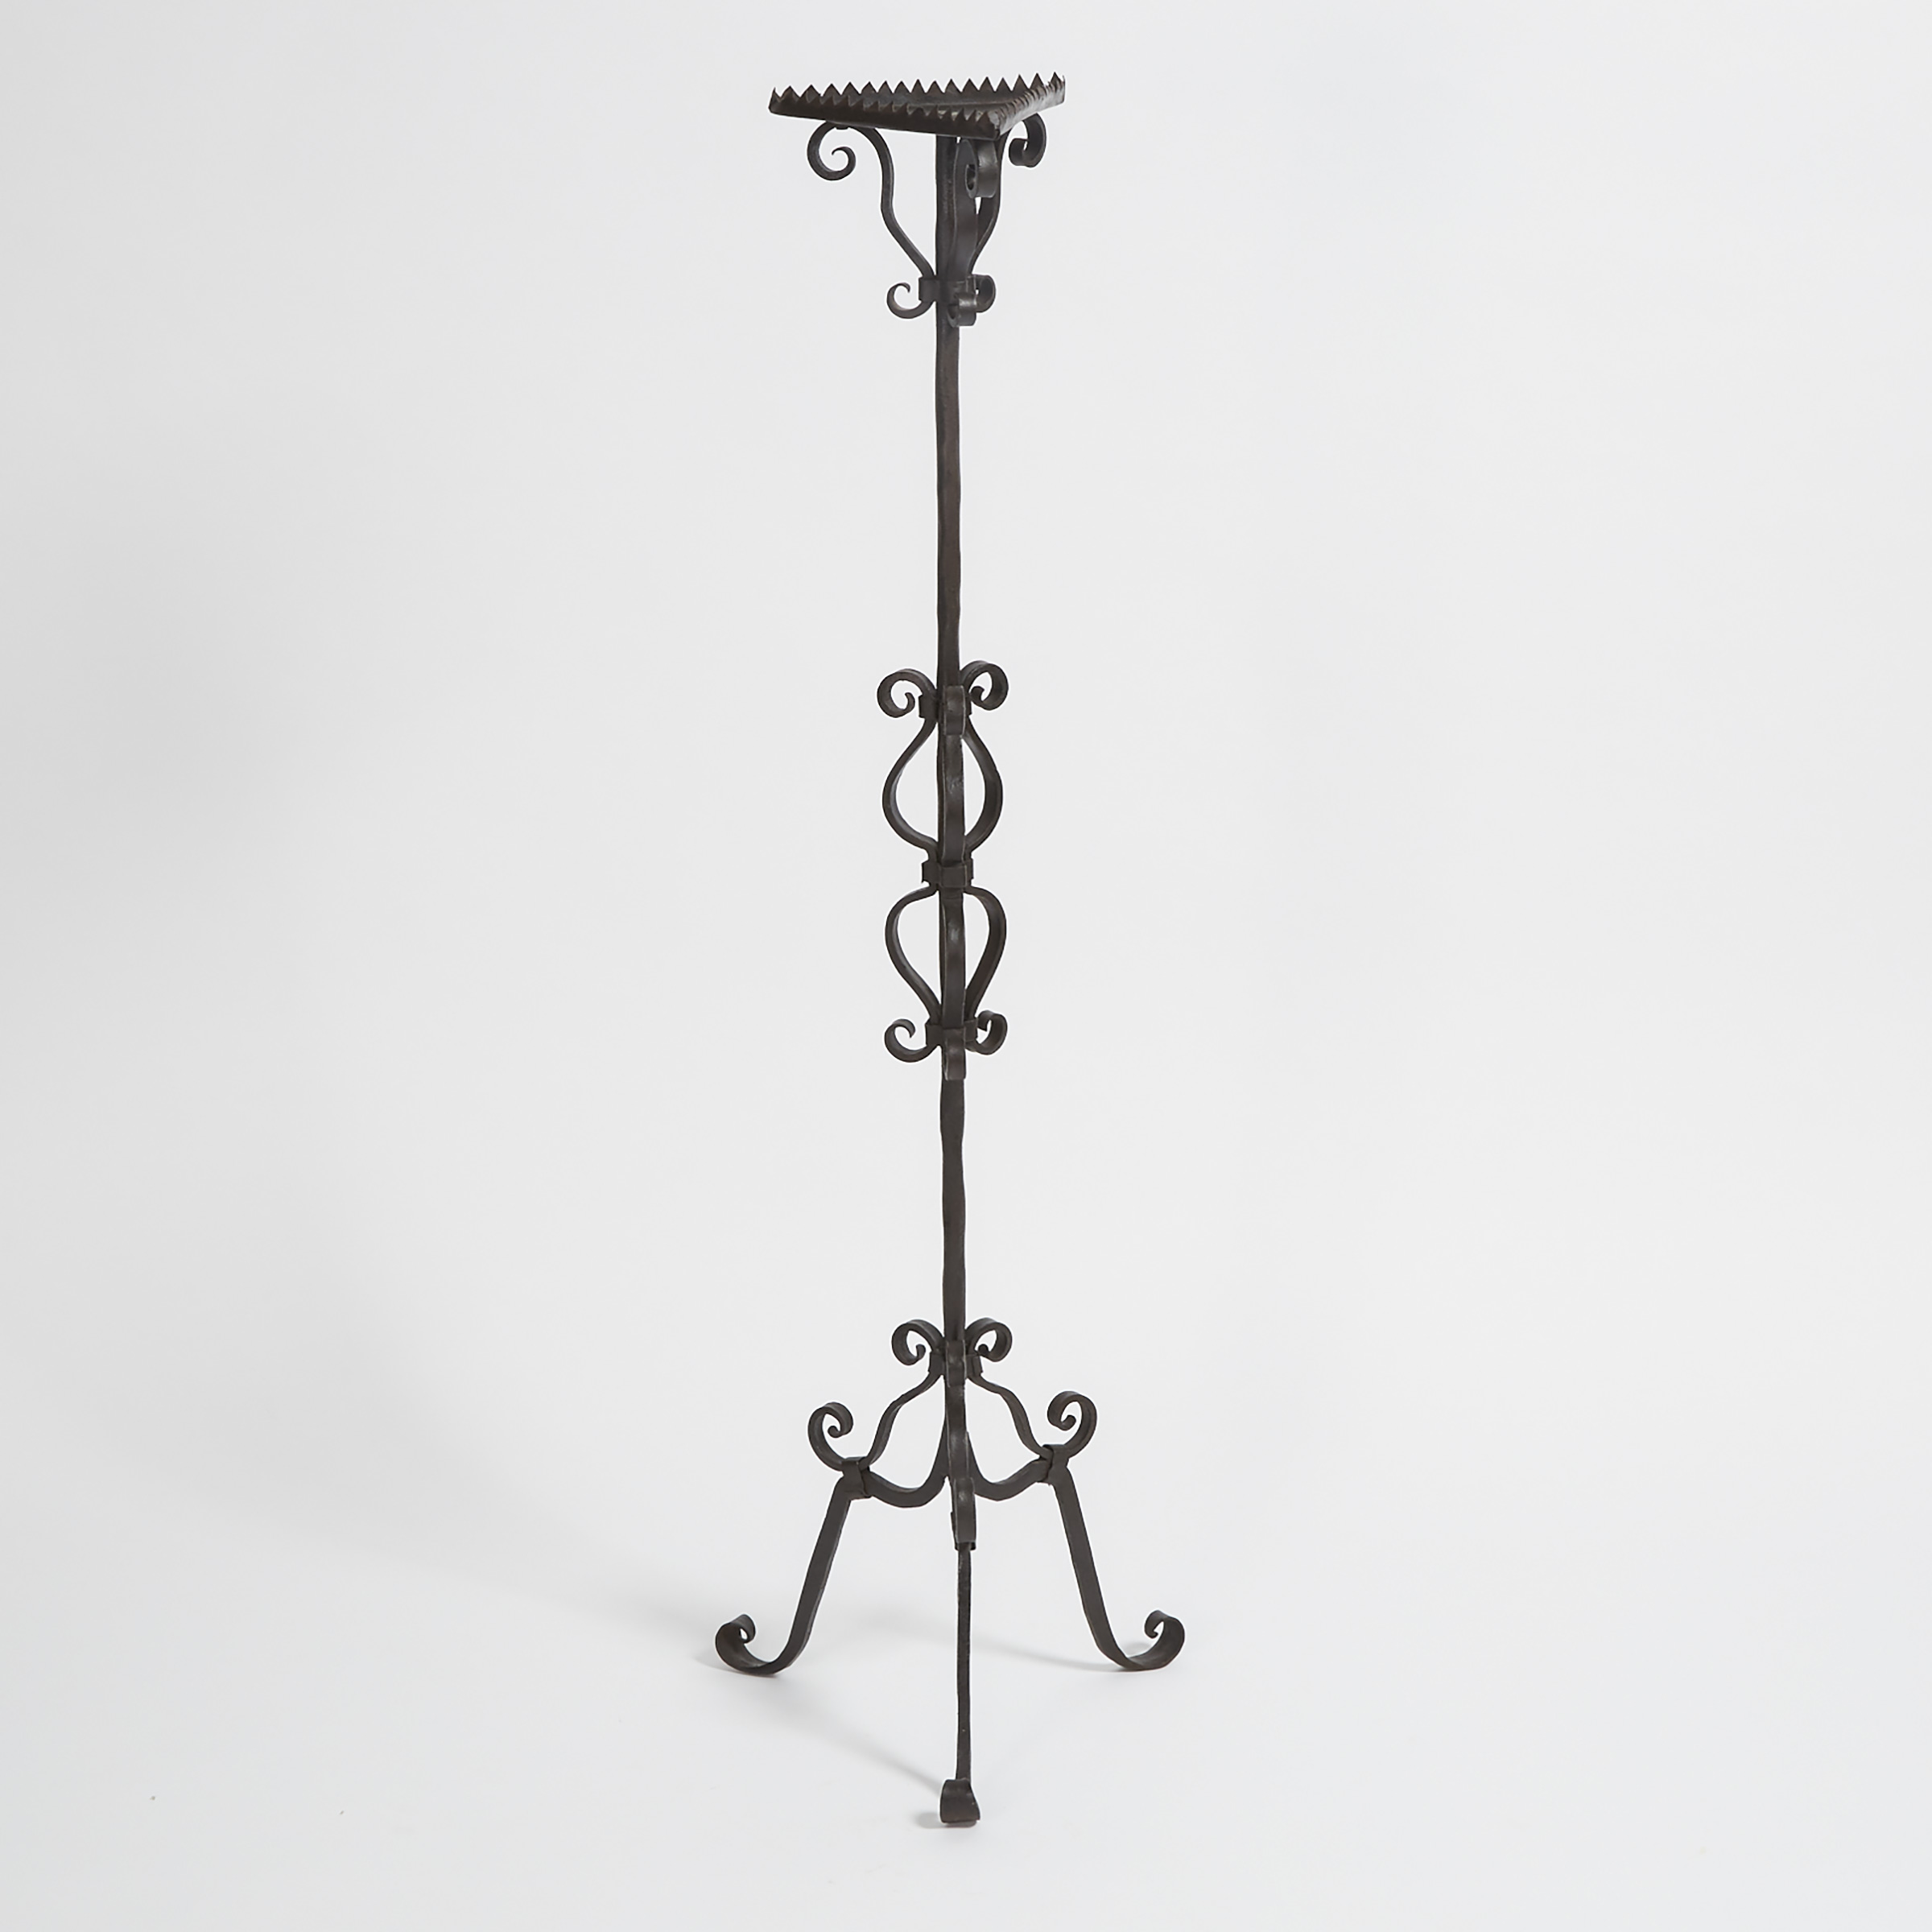 Spanish Wrought Iron Torchiere Candle Stand, 18th/19th century